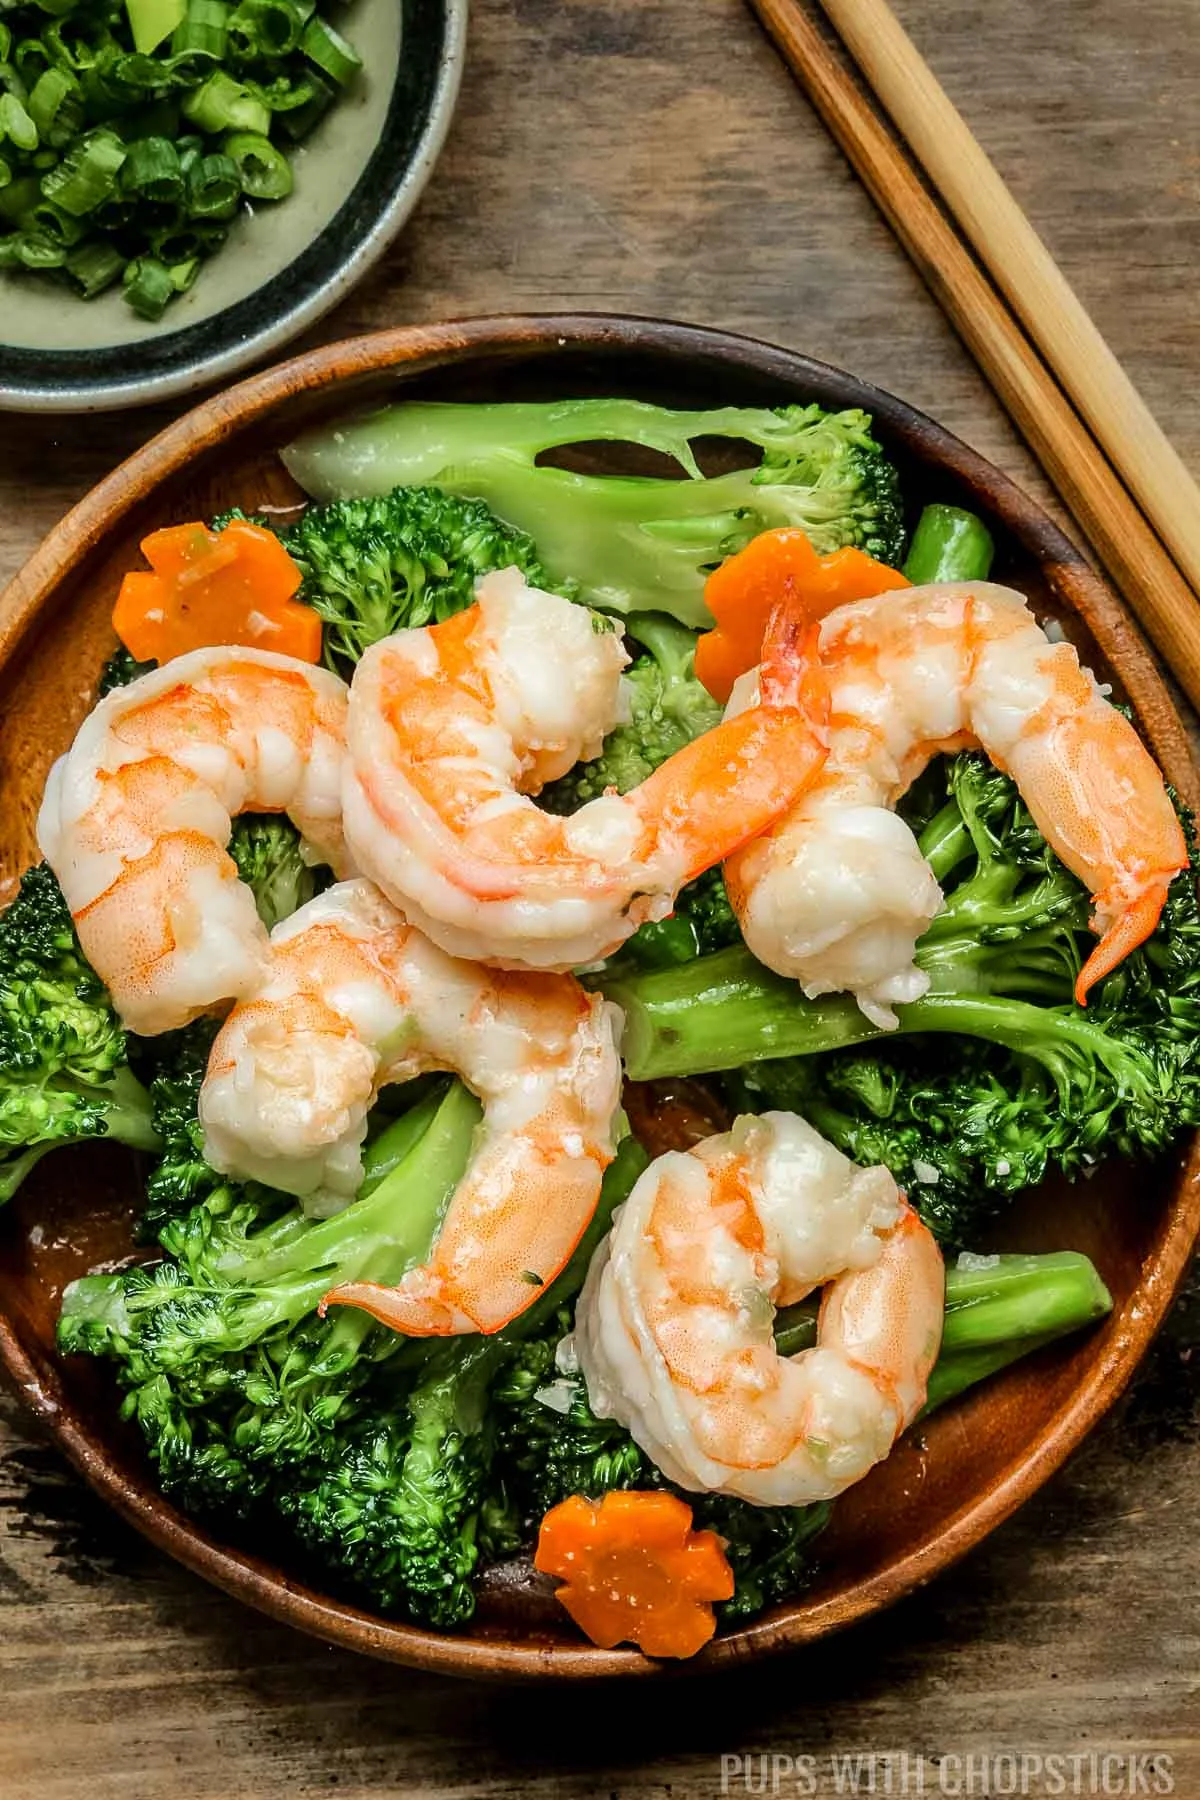 Shrimp and broccoli in a brown plate with a side of green onions and chopsticks.